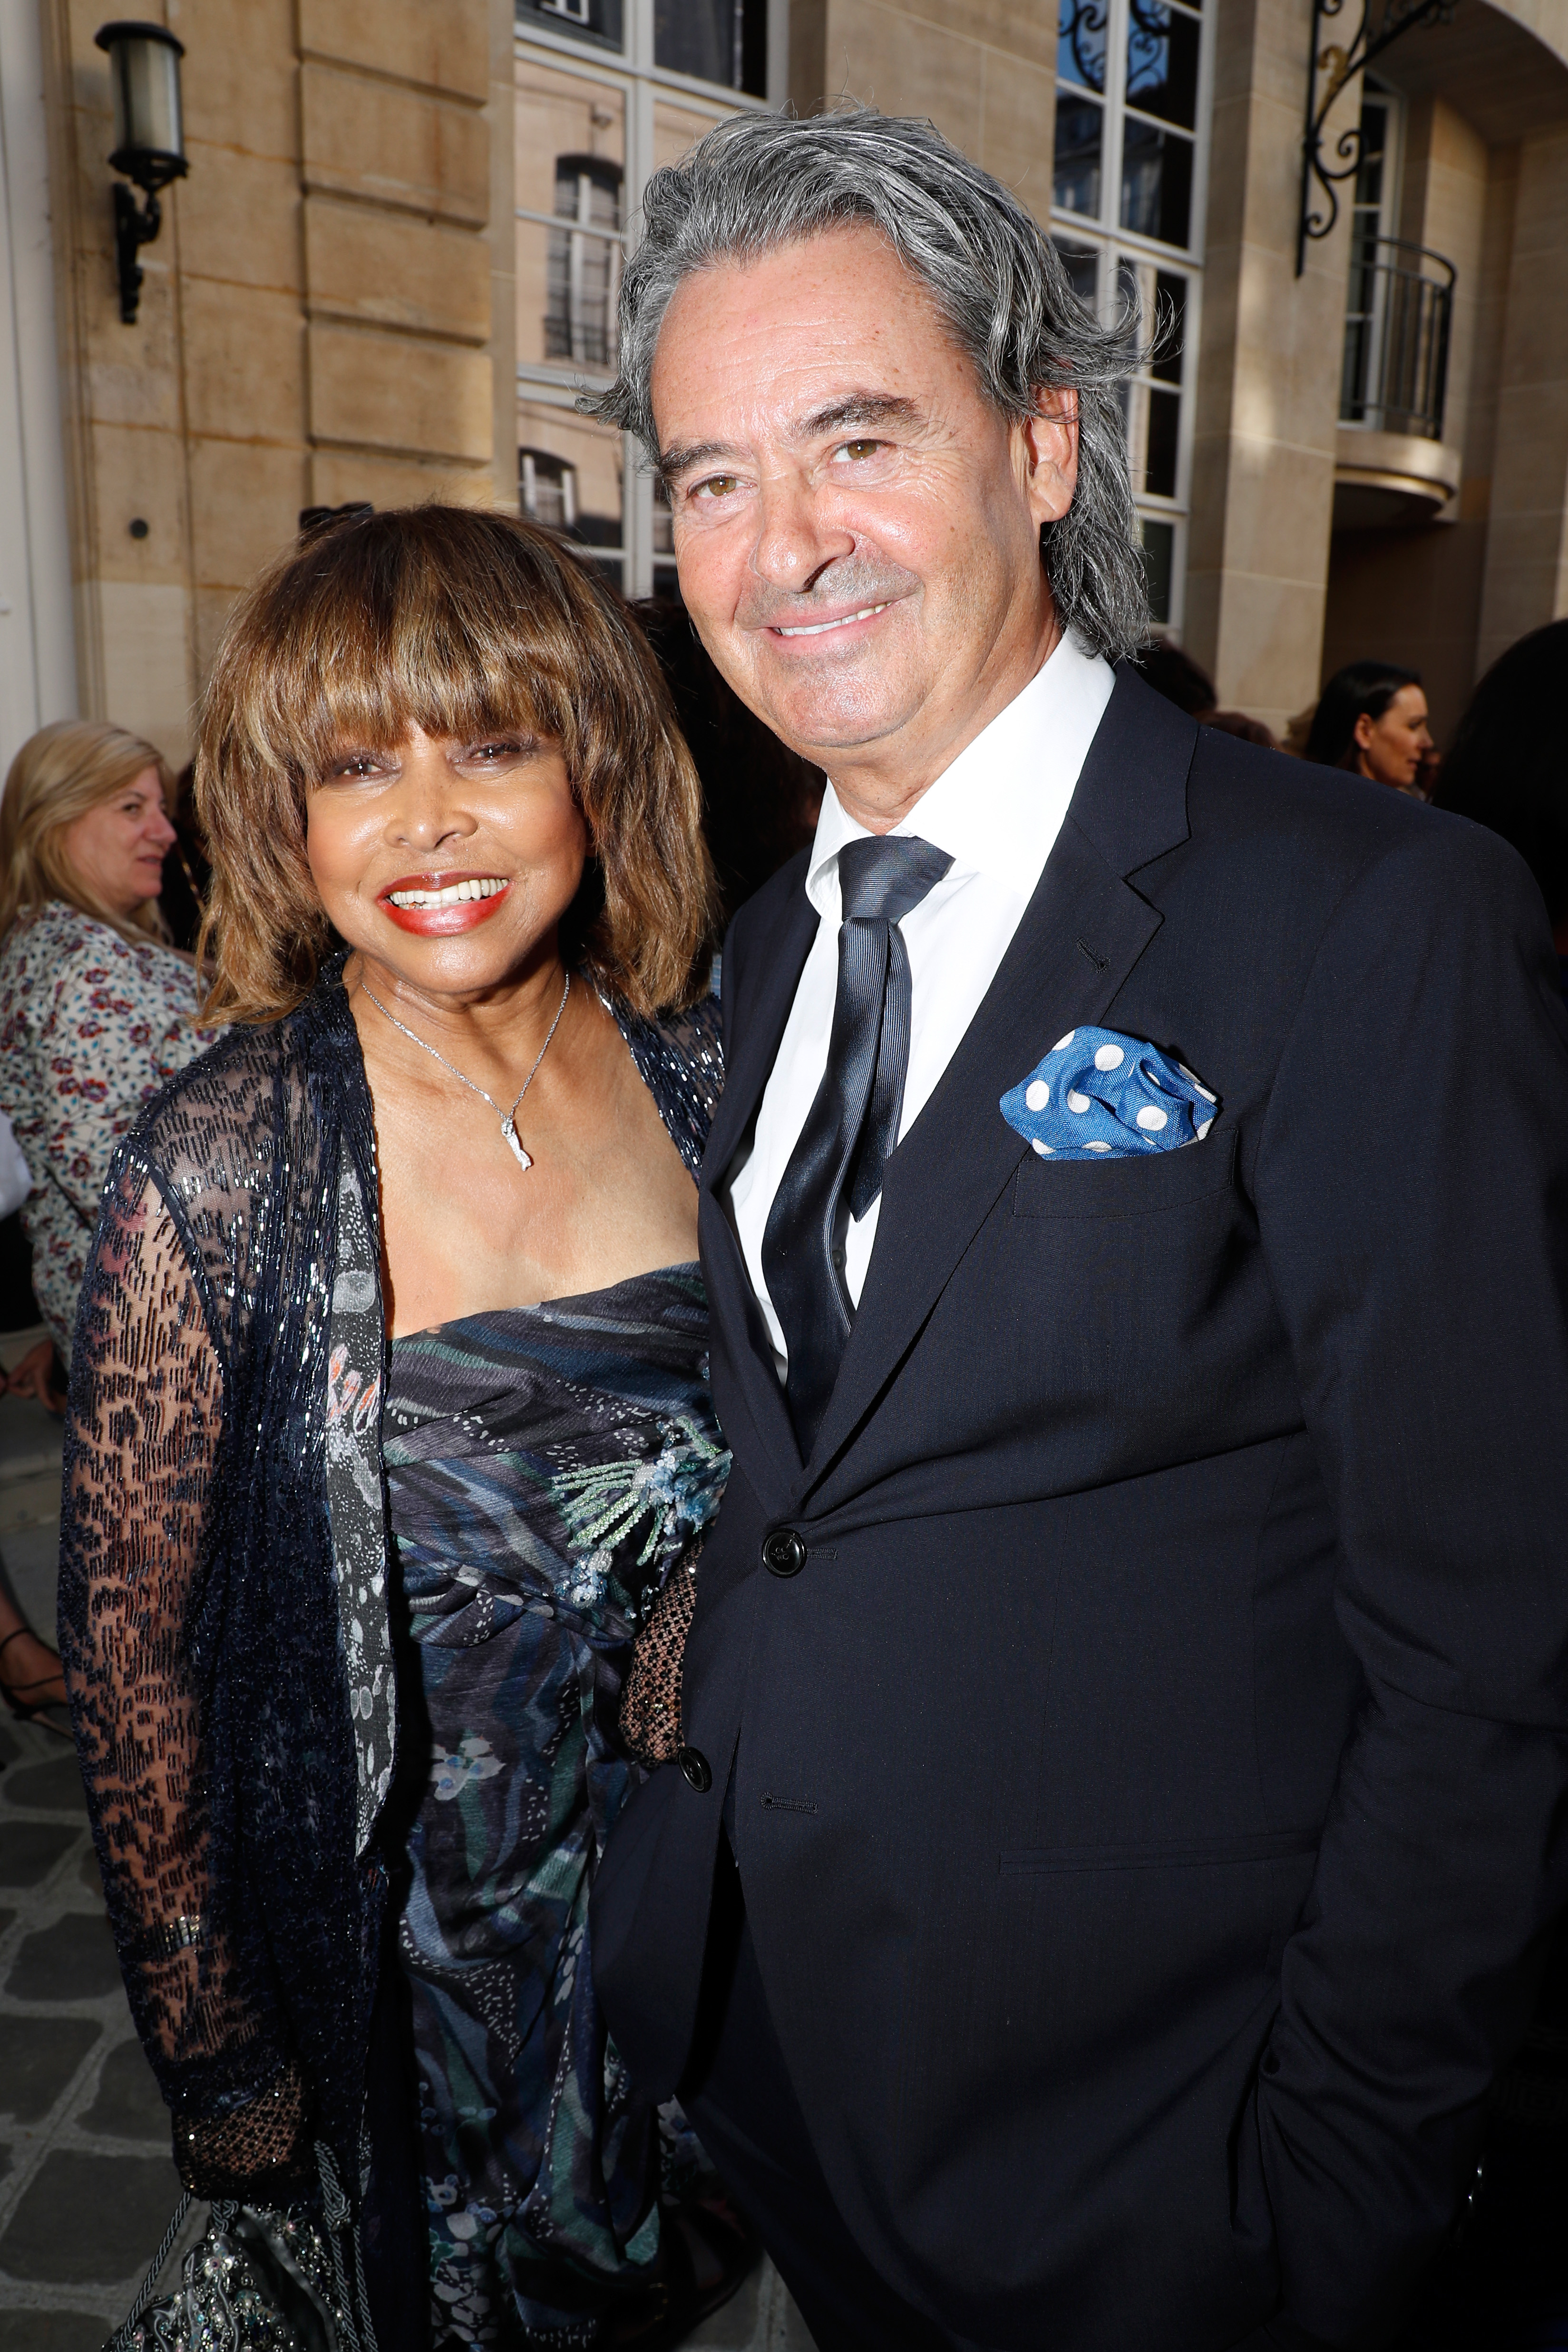 Tina Turner and her husband Erwin Bach at the Giorgio Armani Prive Haute Couture Fall Winter 2018/2019 show as part of Paris Fashion Week on July 3, 2018, in Paris, France | Source: Getty Images